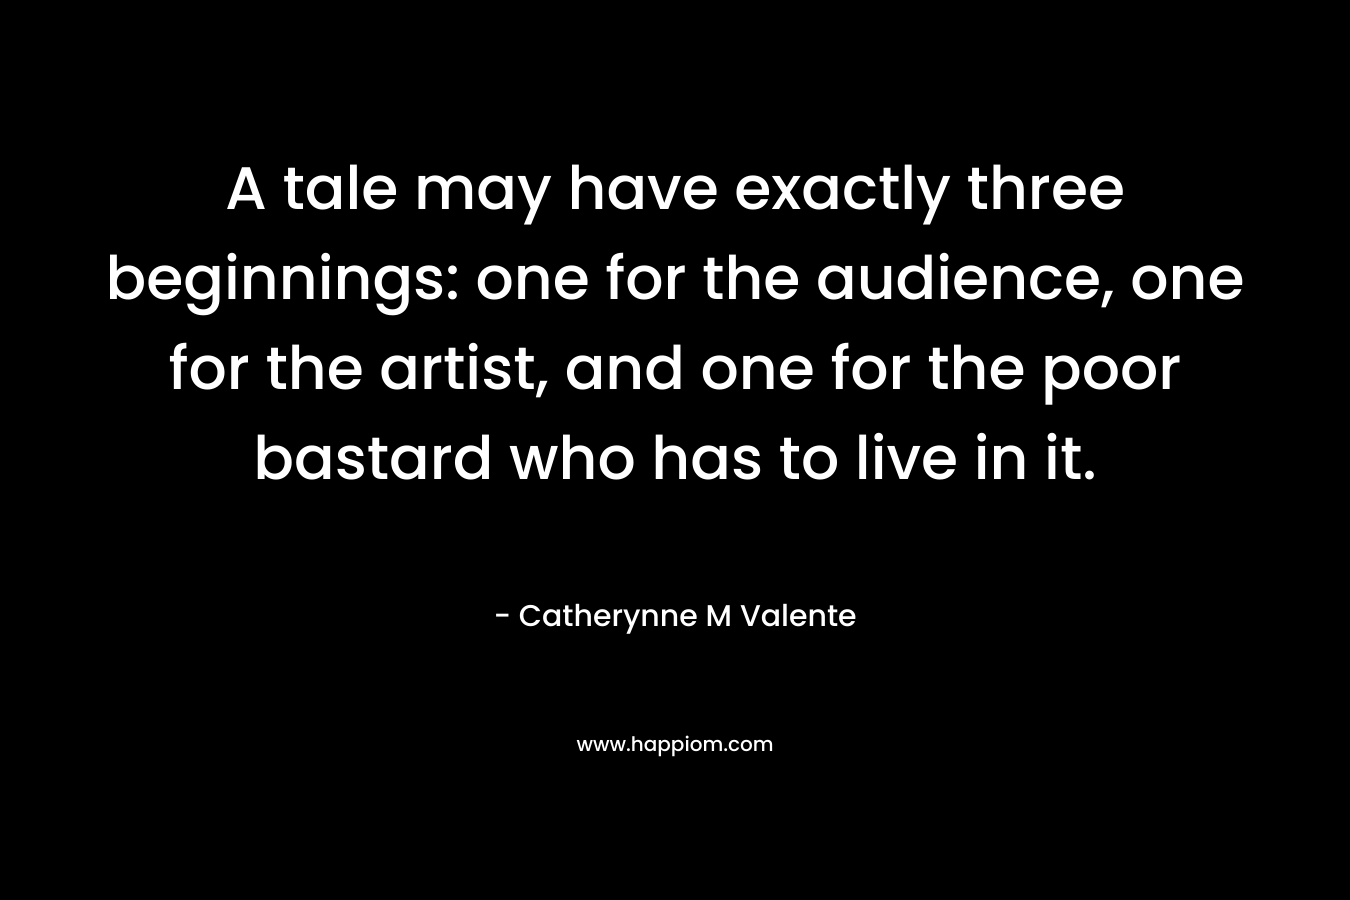 A tale may have exactly three beginnings: one for the audience, one for the artist, and one for the poor bastard who has to live in it. – Catherynne M Valente